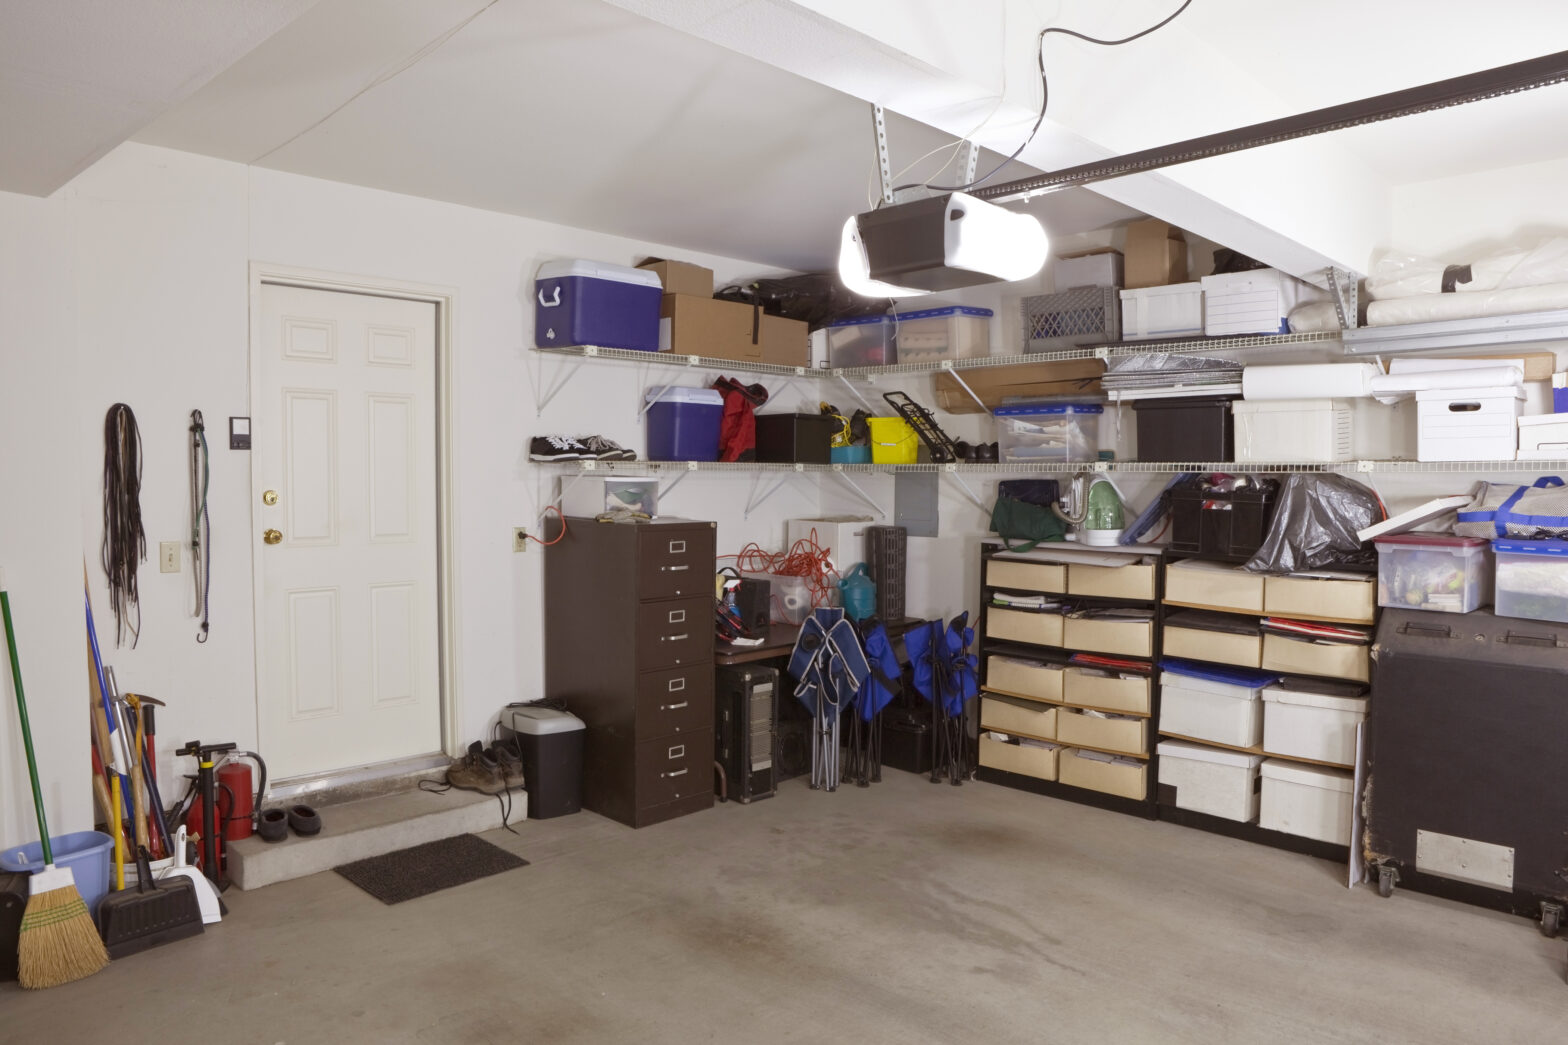 Organize Your Garage for Safety and Efficiency